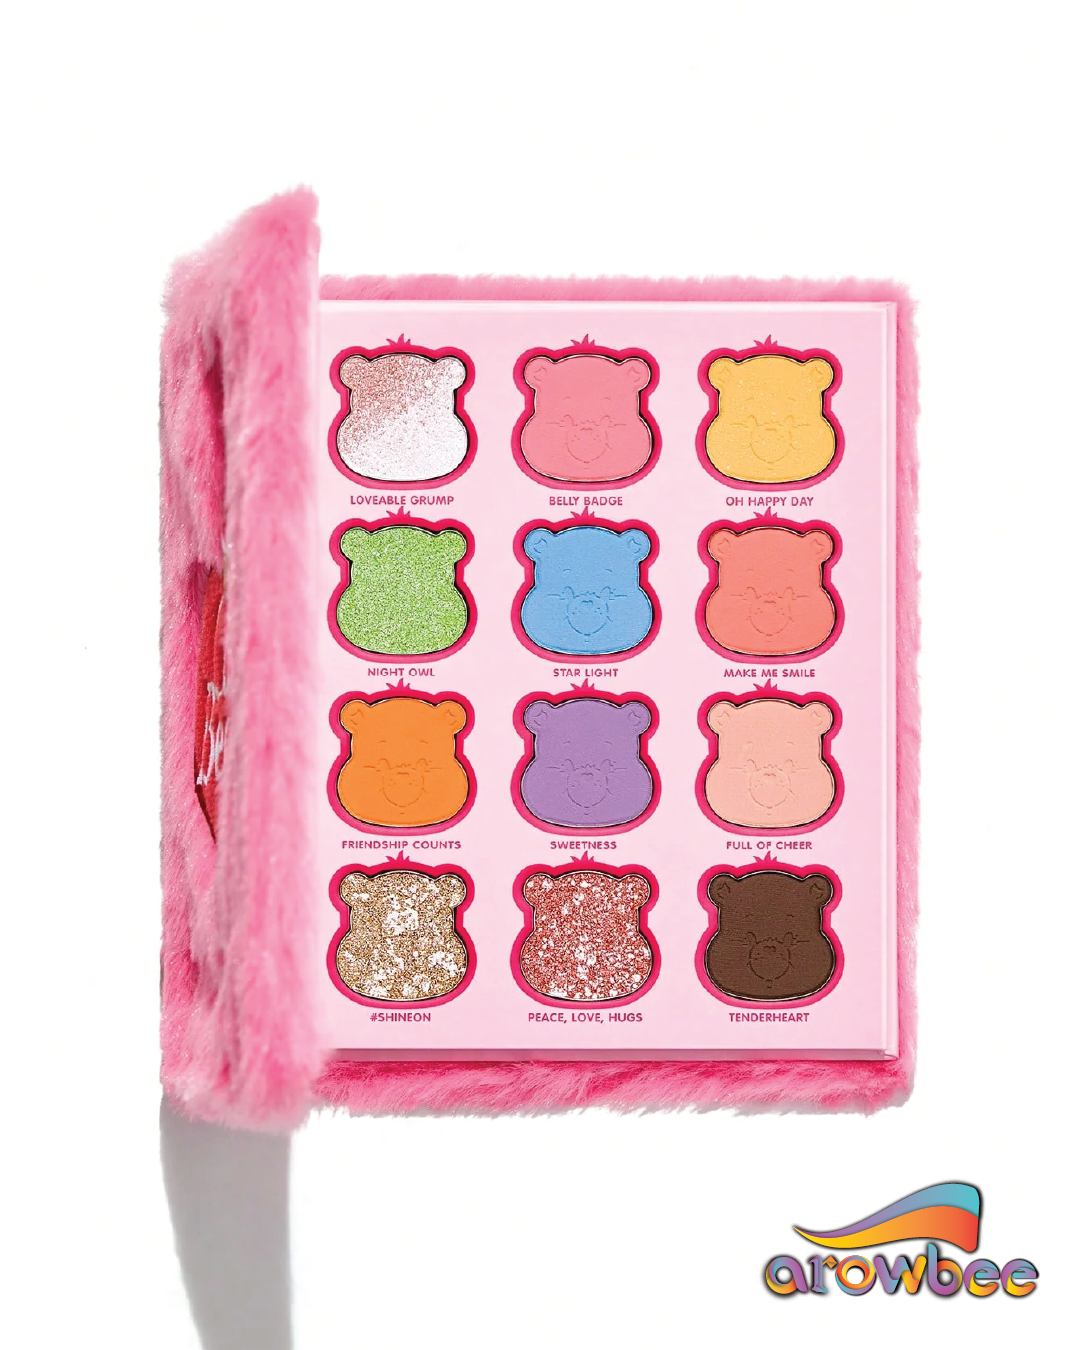 SHEGLAM X Care Bears Share Your Care Palette